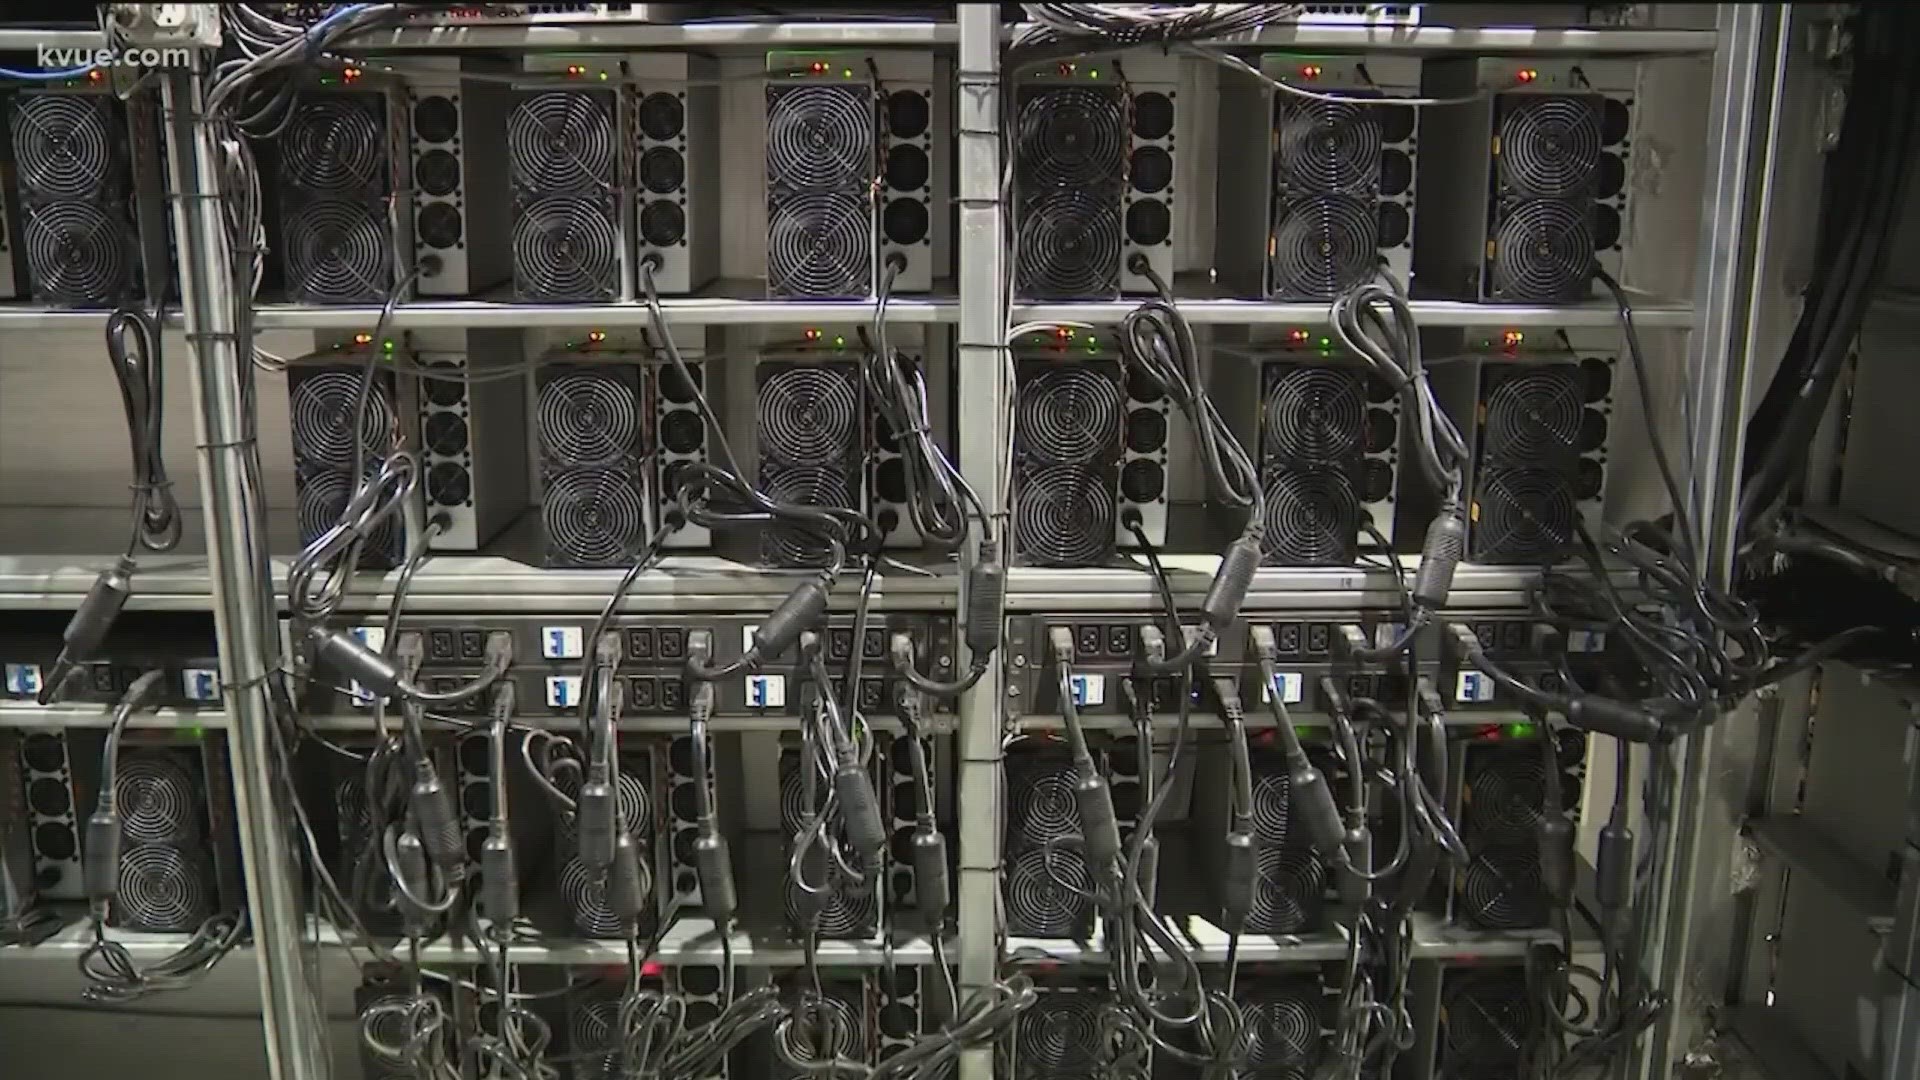 Cryptocurrency miners are worried a federal survey could be used against them.